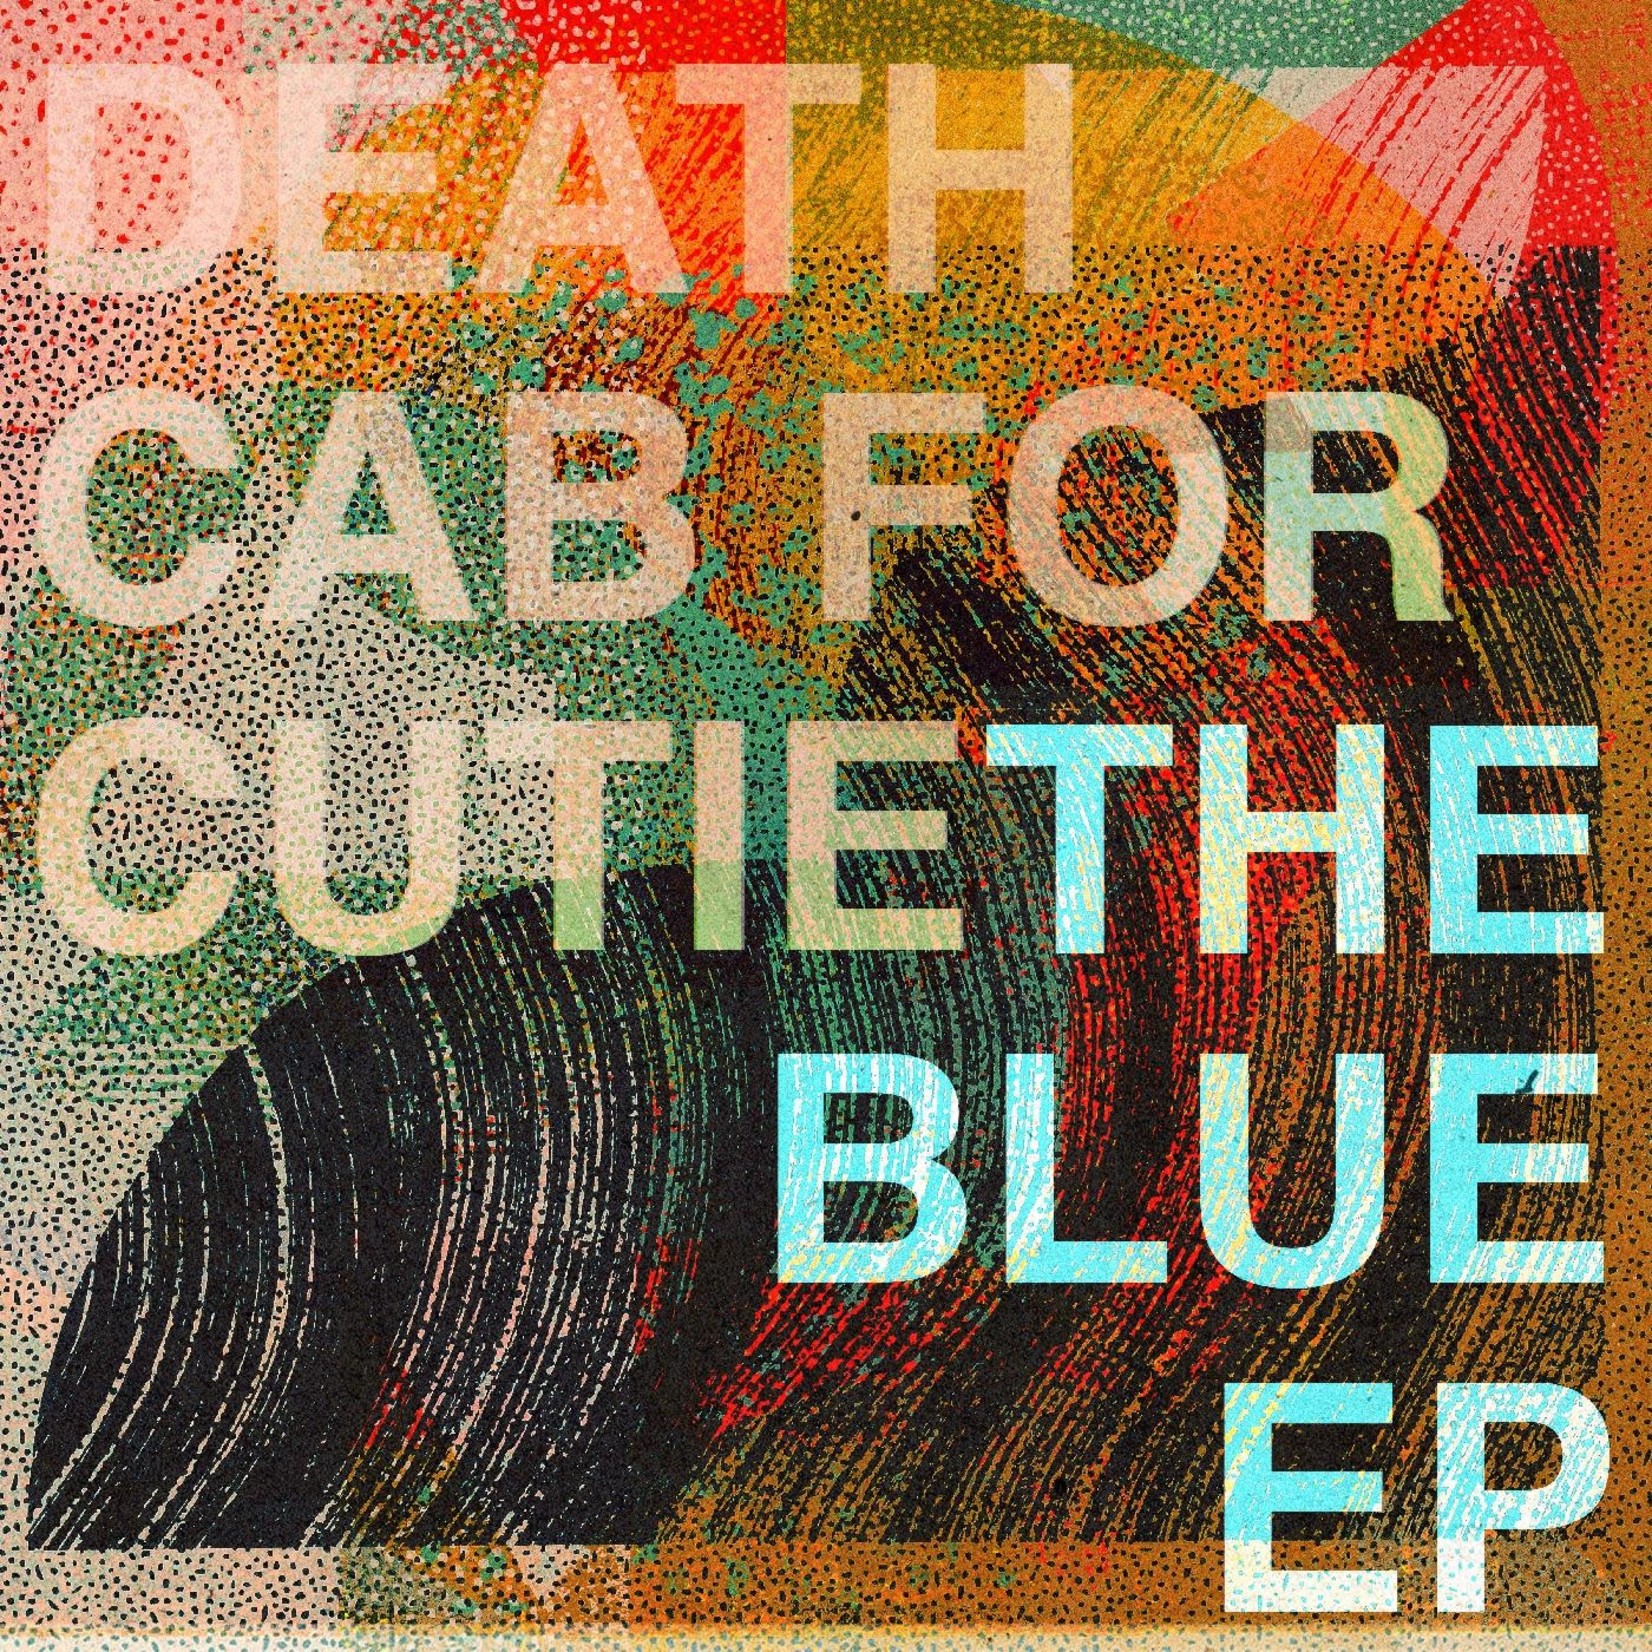 Barsuk Death Cab For Cutie - The Blue EP (12")